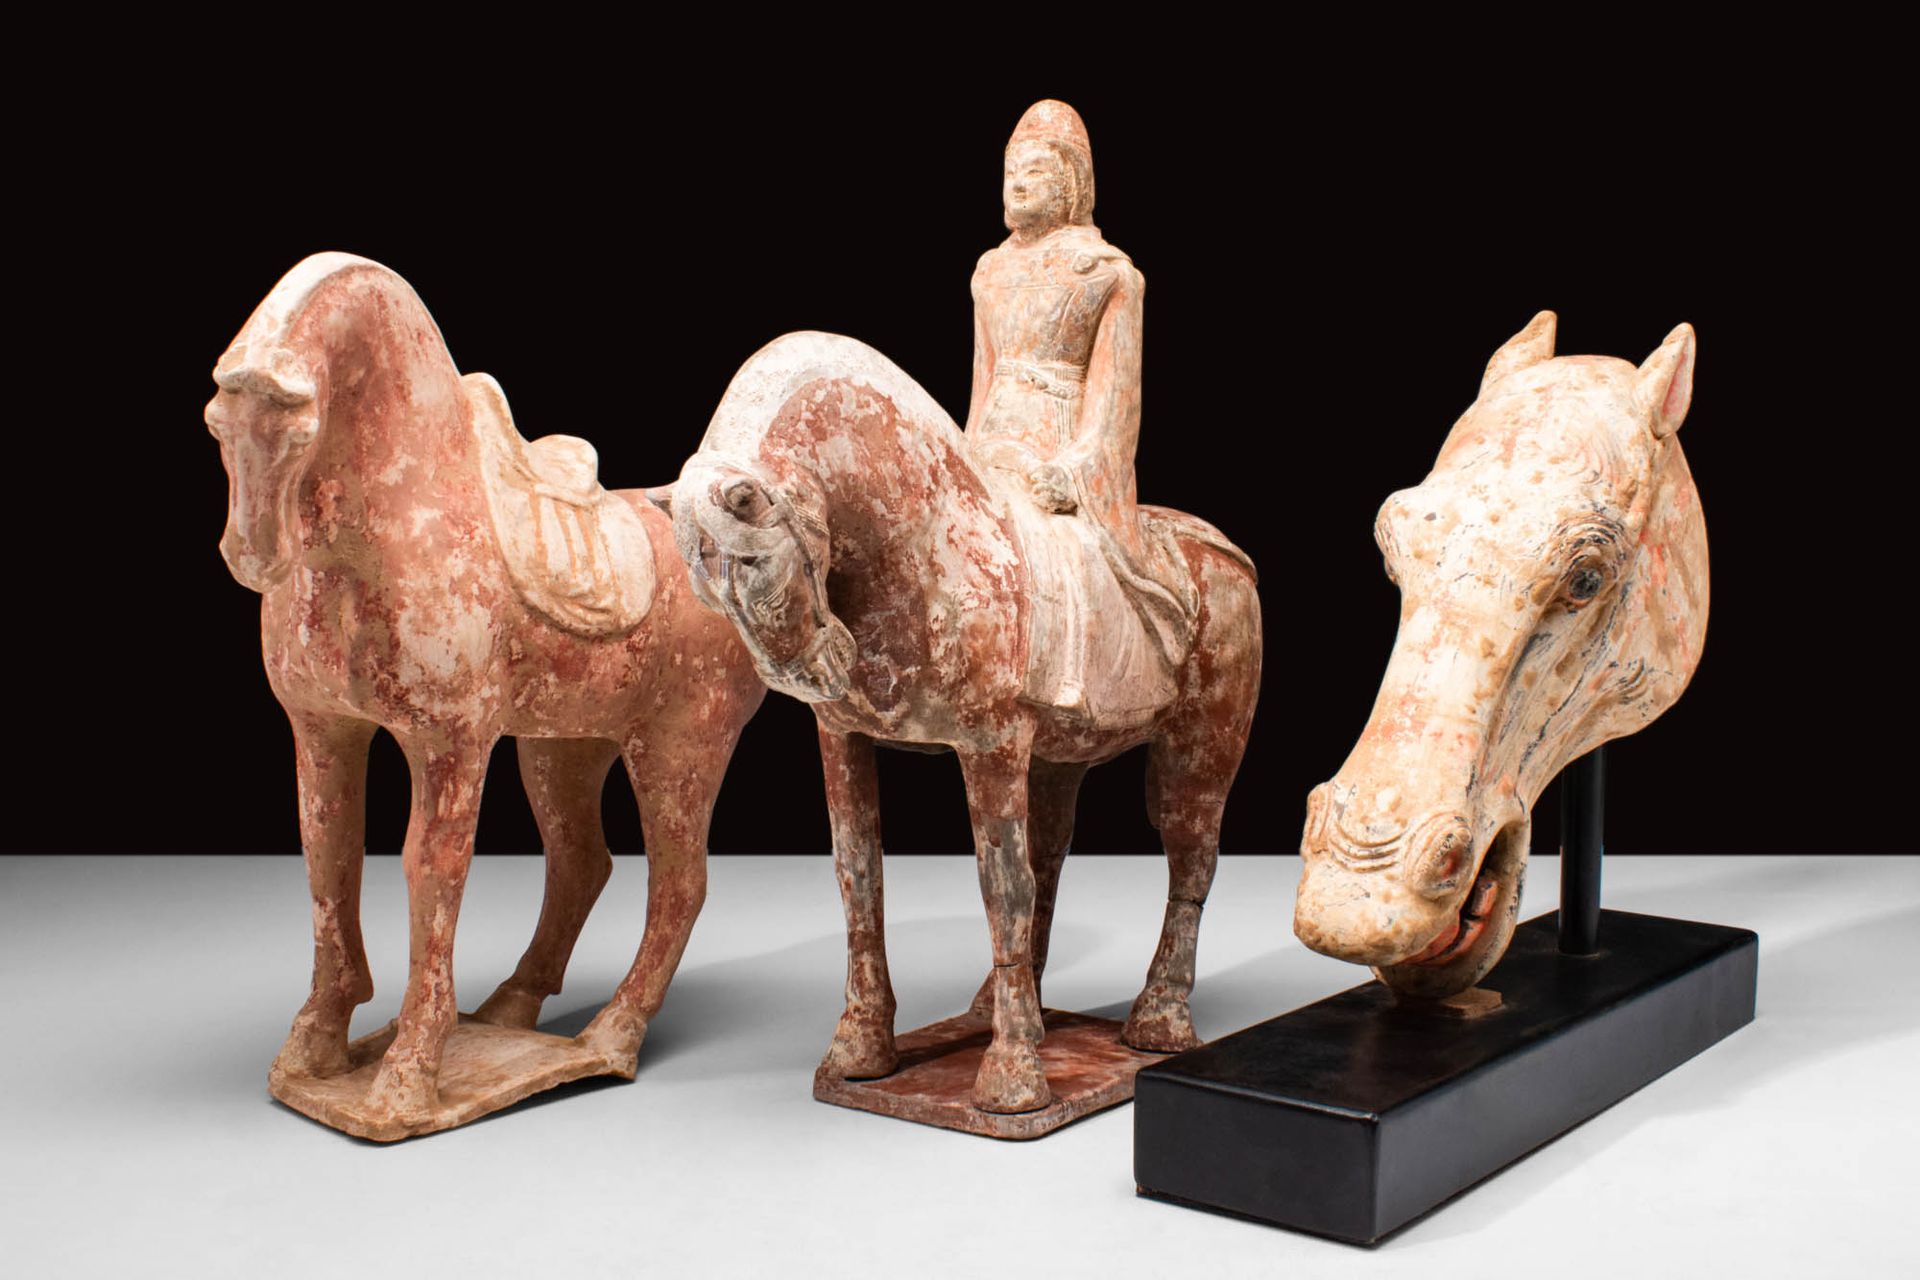 COLLECTION OF THREE CHINESE TANG DYNASTY TERRACOTTA STATUES 唐朝，约公元 618 - 907 年。公&hellip;